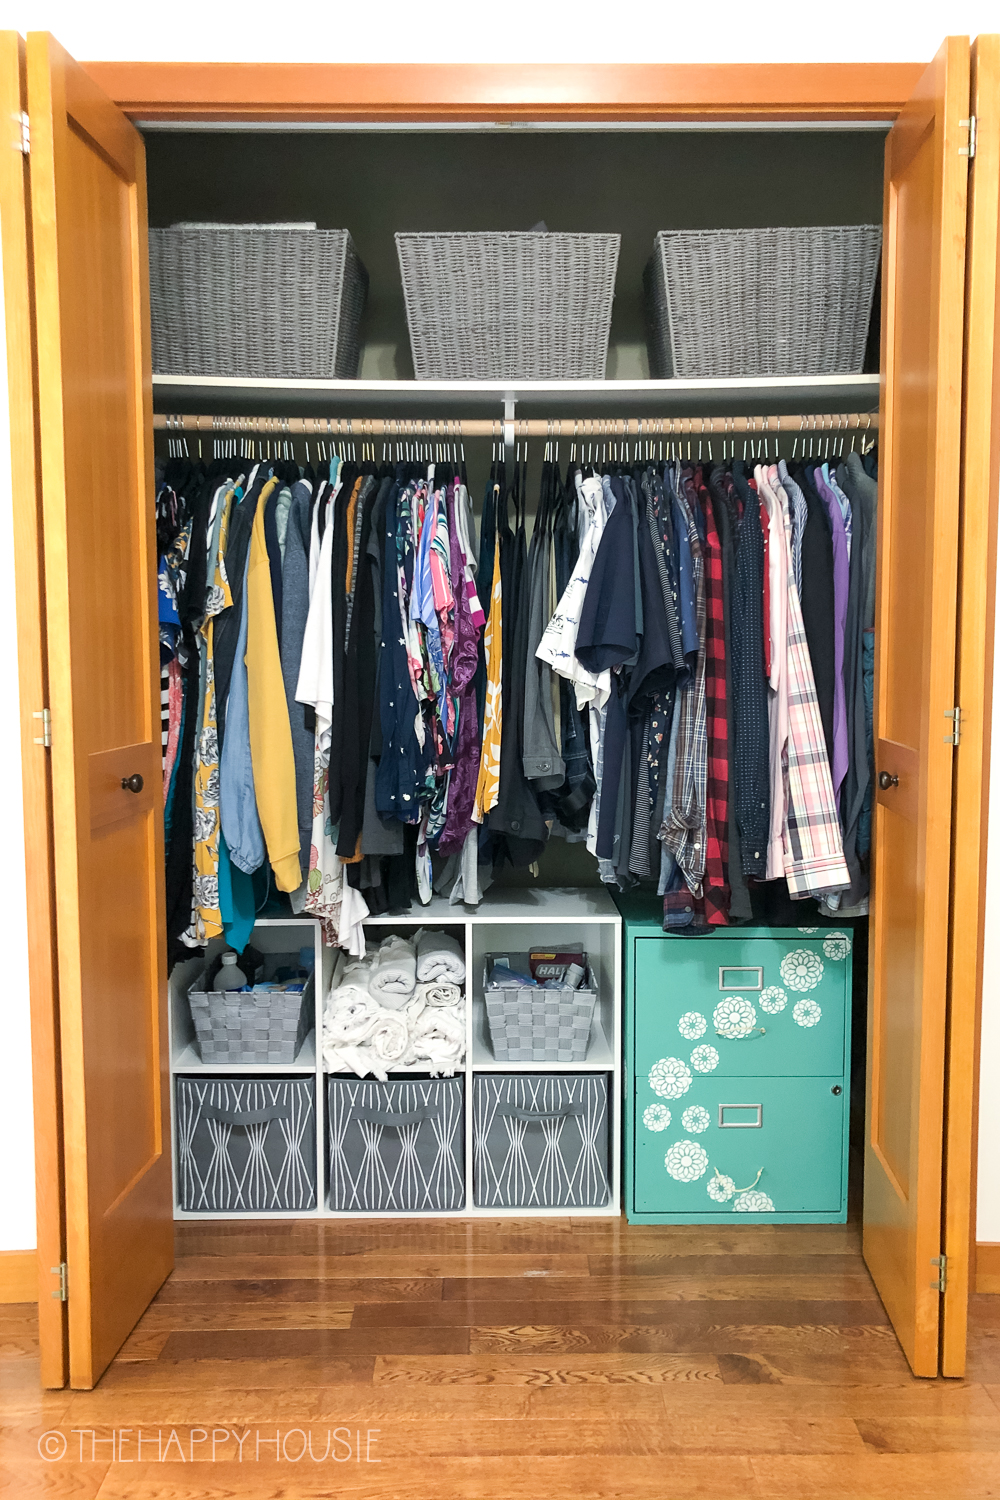 https://www.thehappyhousie.com/wp-content/uploads/2020/08/how-to-organize-a-small-reach-in-closet-for-multi-purpose-storage.jpg